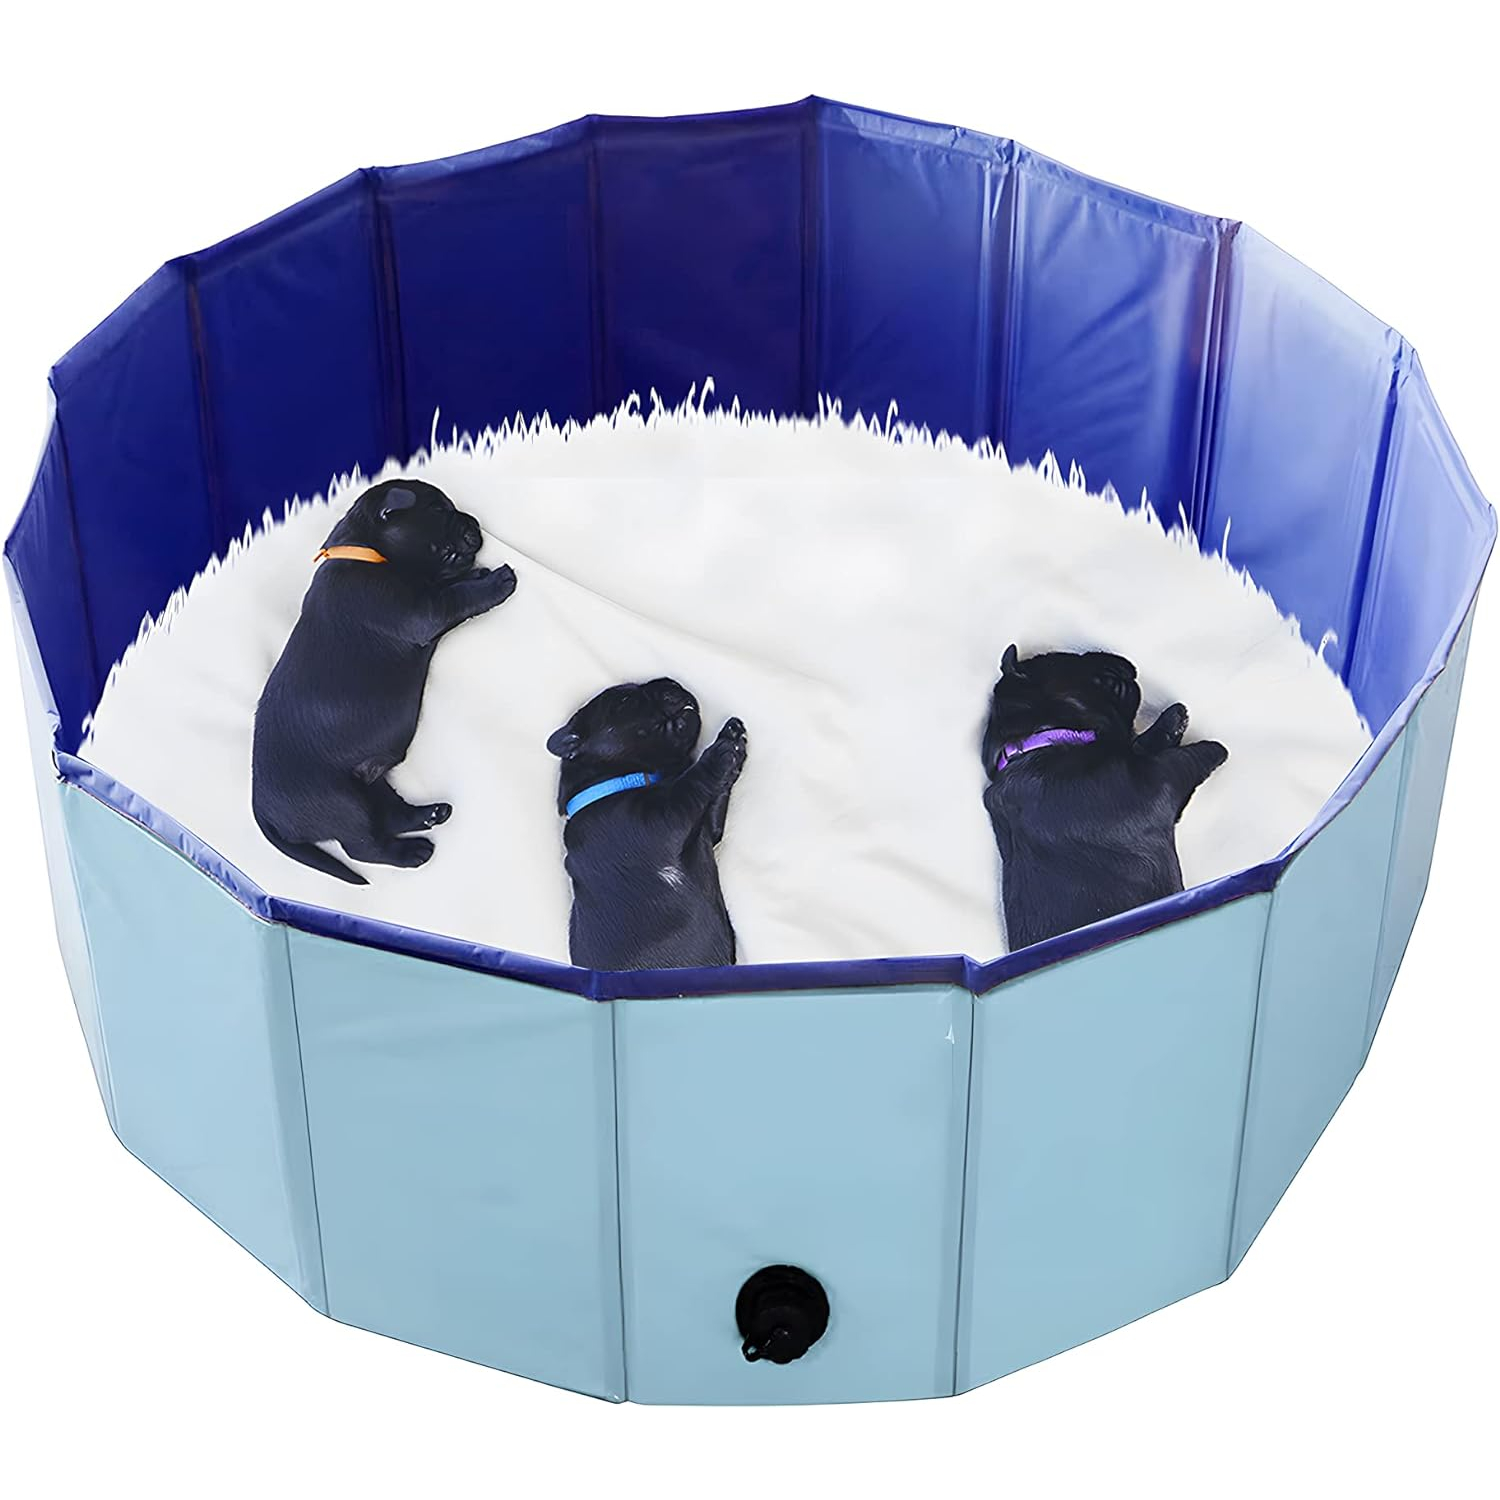 Artilife Whelping Box for Dogs